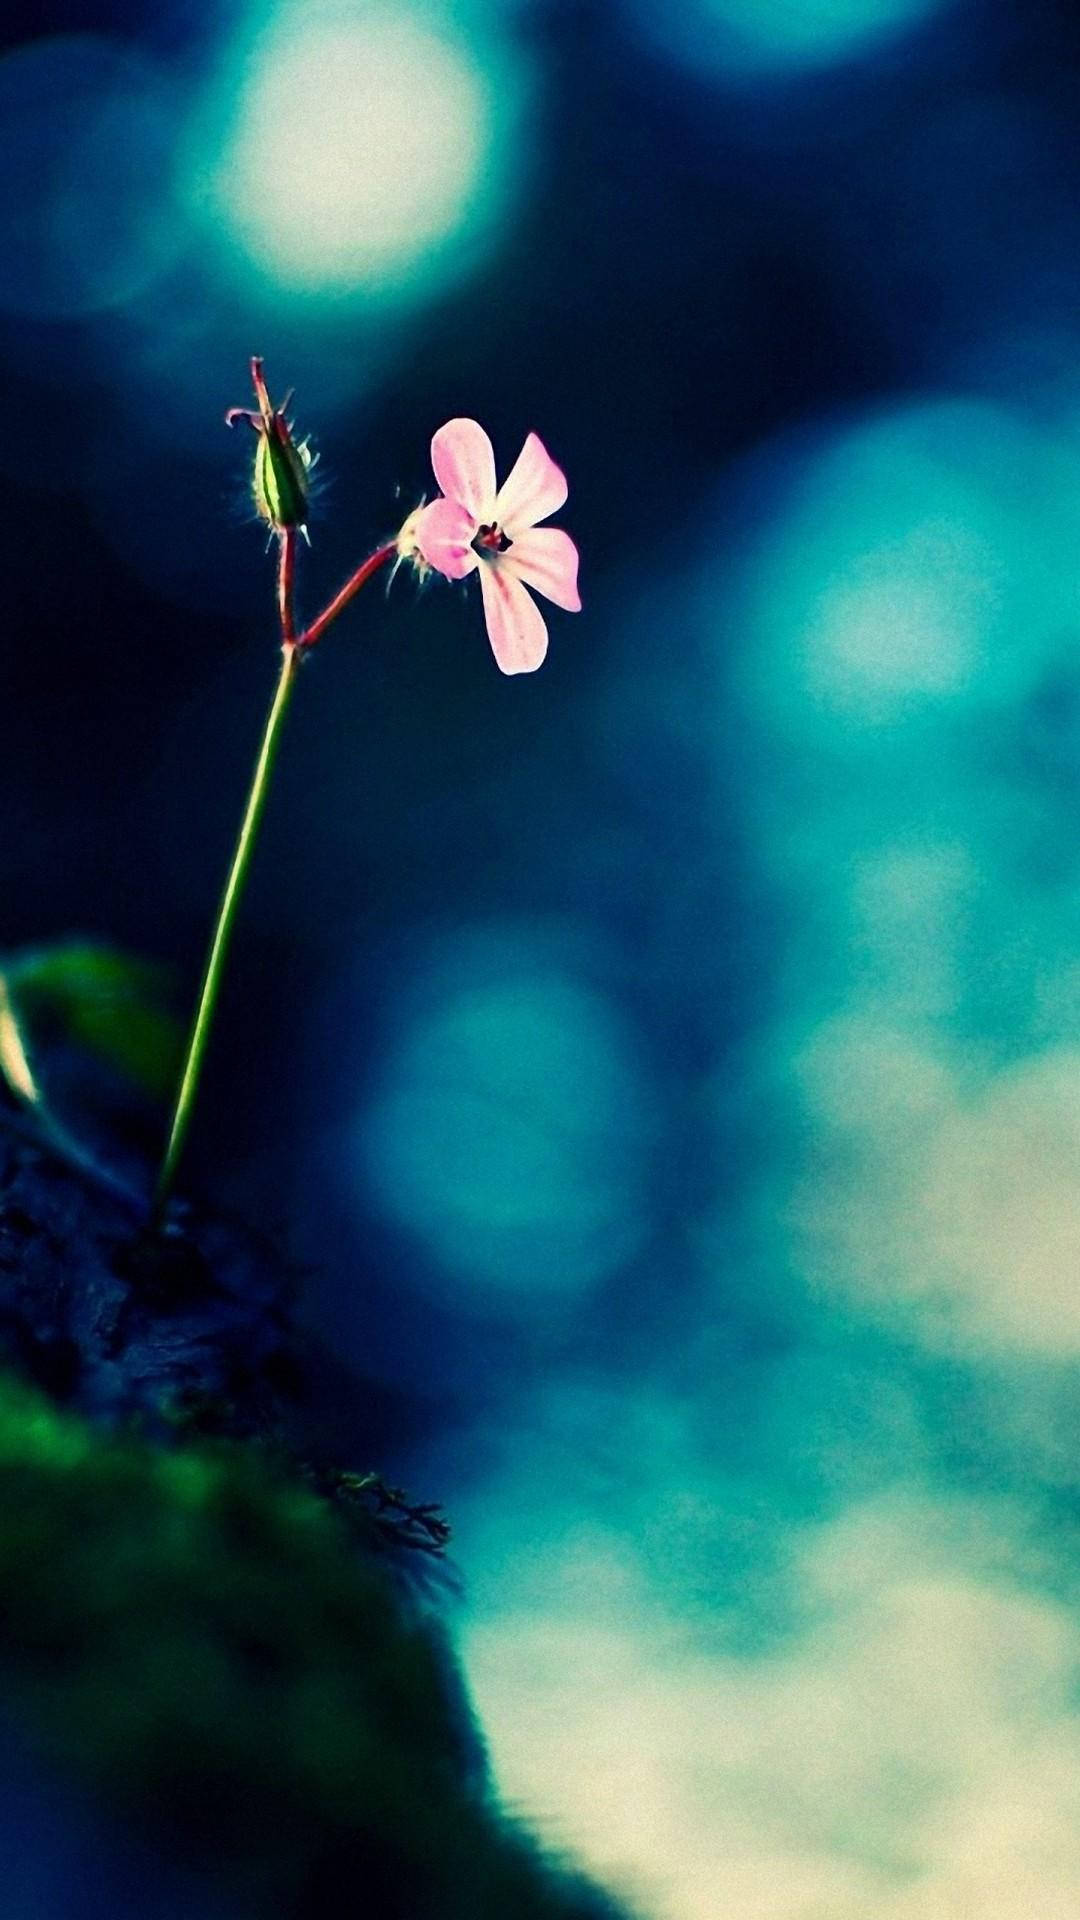 Vollehd Winzige Blume Wachsendes Android Wallpaper